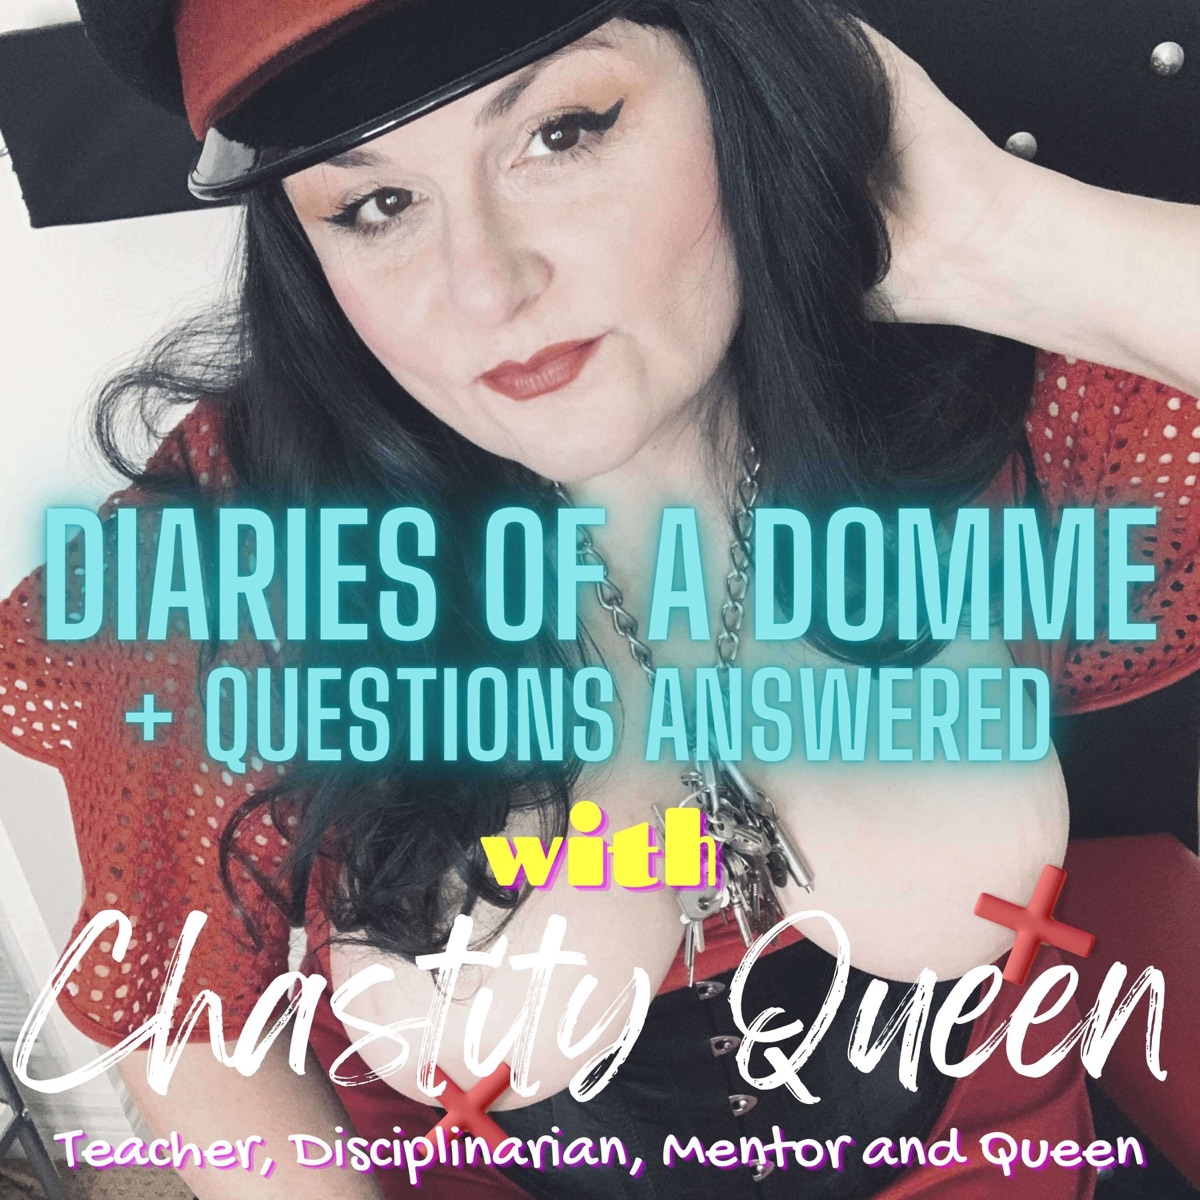 Diaries of a Domme + Questions Answered, by Chastity Queen – Lyssna image photo